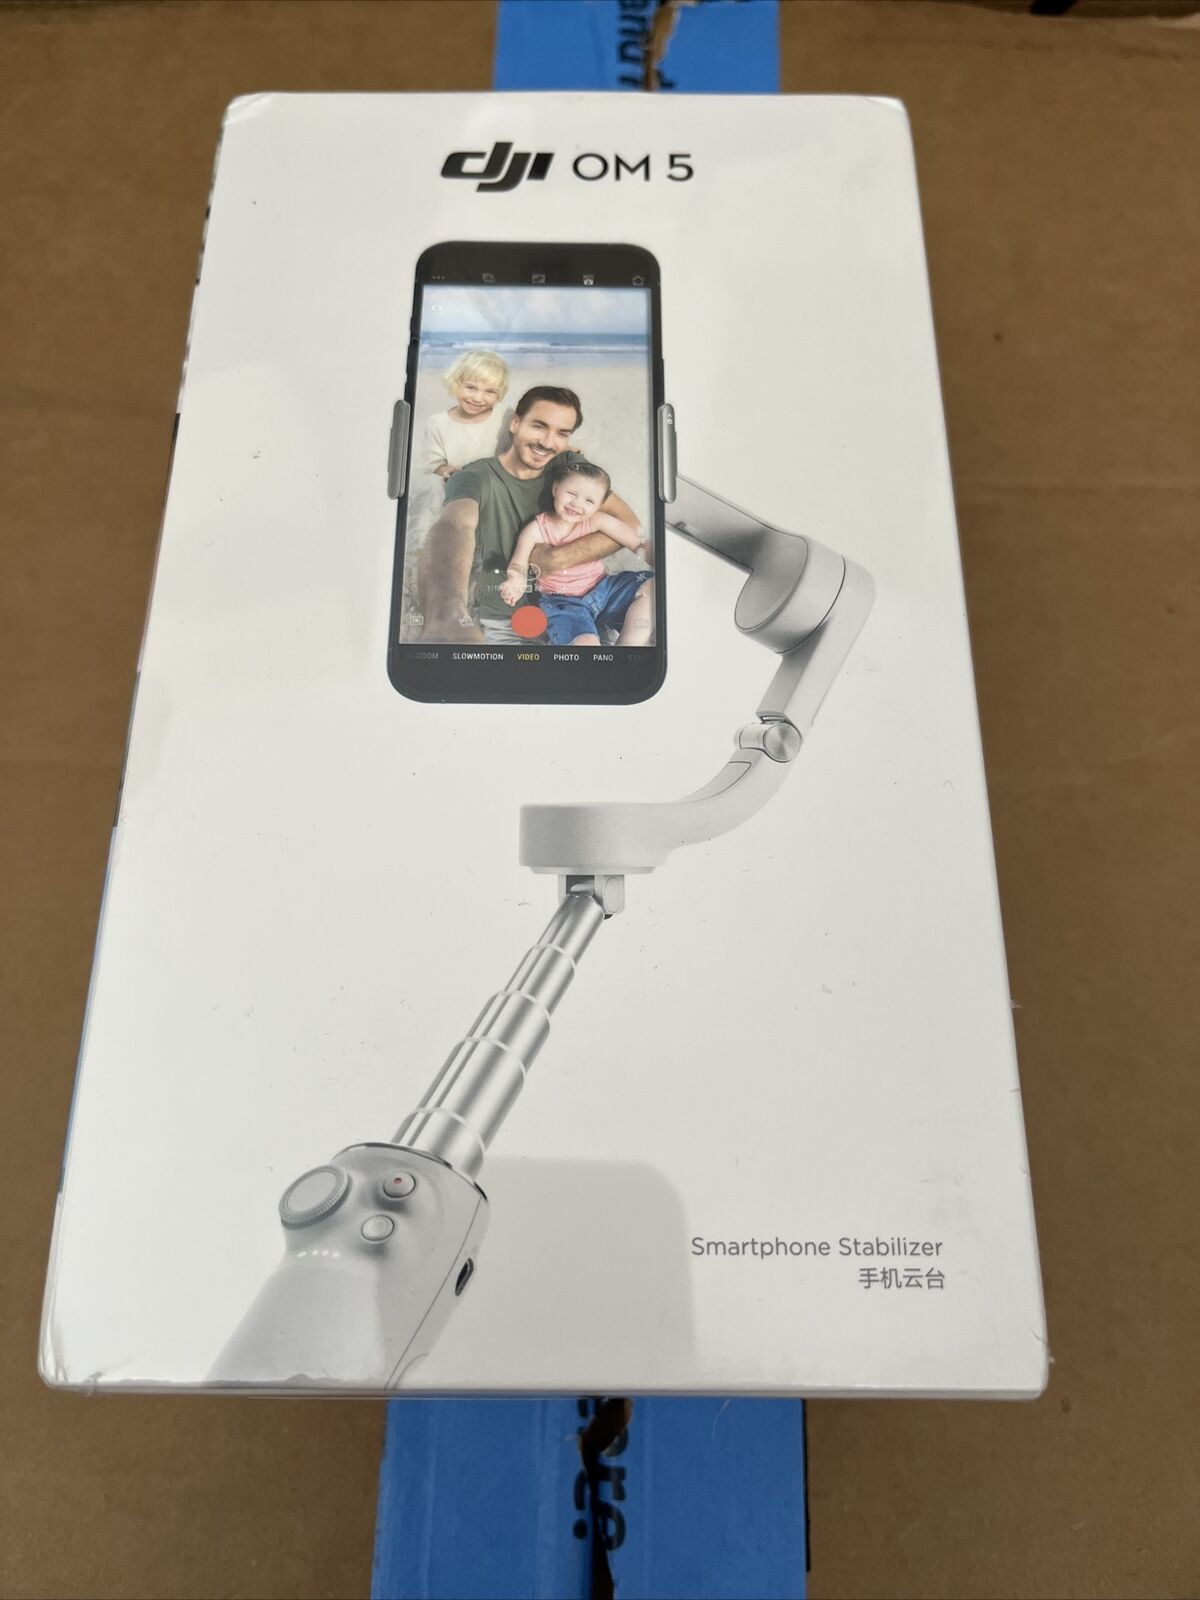 DJI OM 5 Smartphone Gimbal Stabilizer - Athens Gray for sale